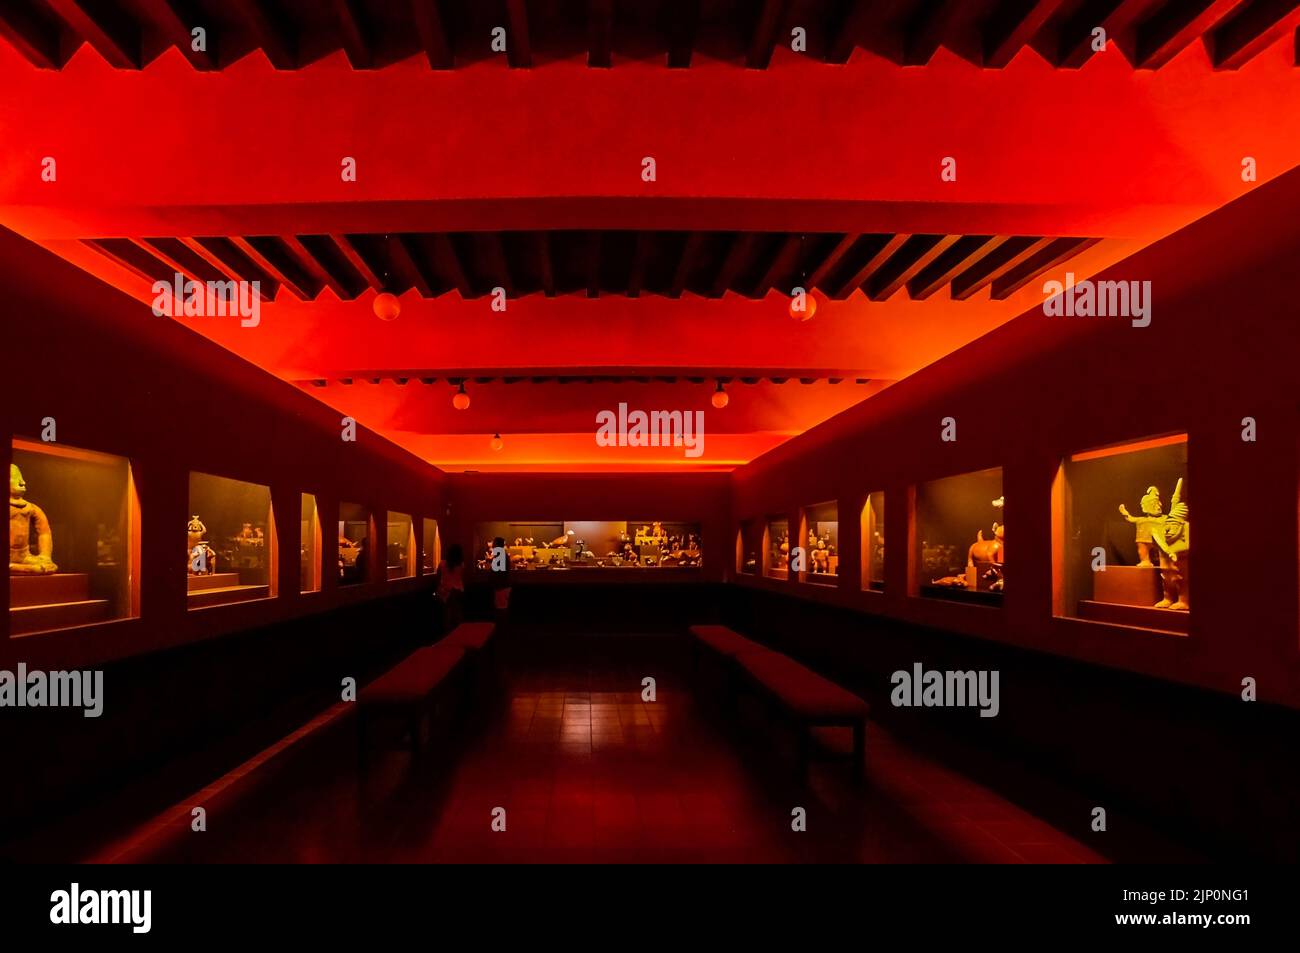 room with red light, you can see a display of antique, primitive, or stone antiques Stock Photo